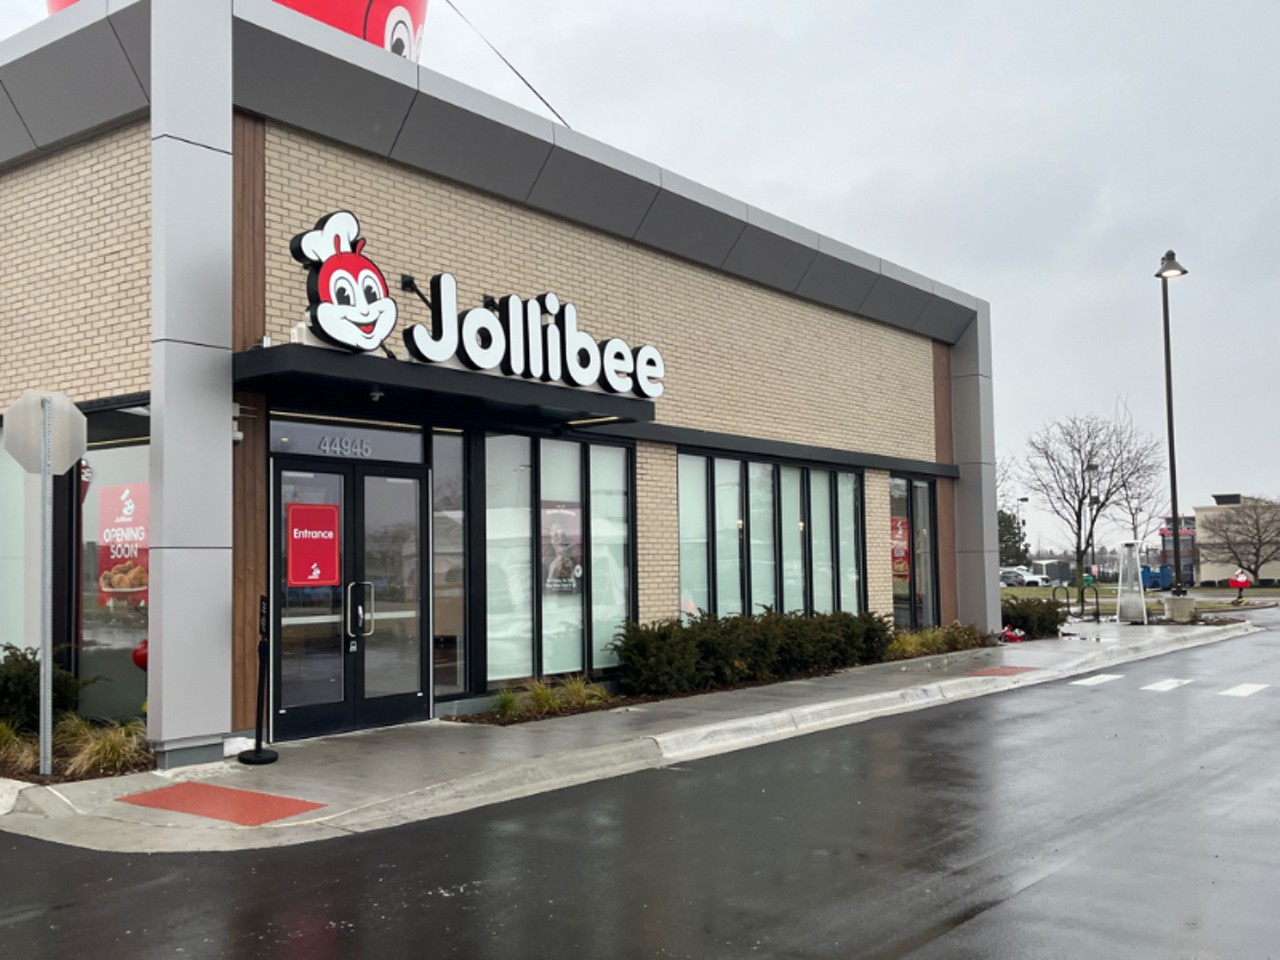 Photos of Jollibee’s first Michigan location in Sterling Heights